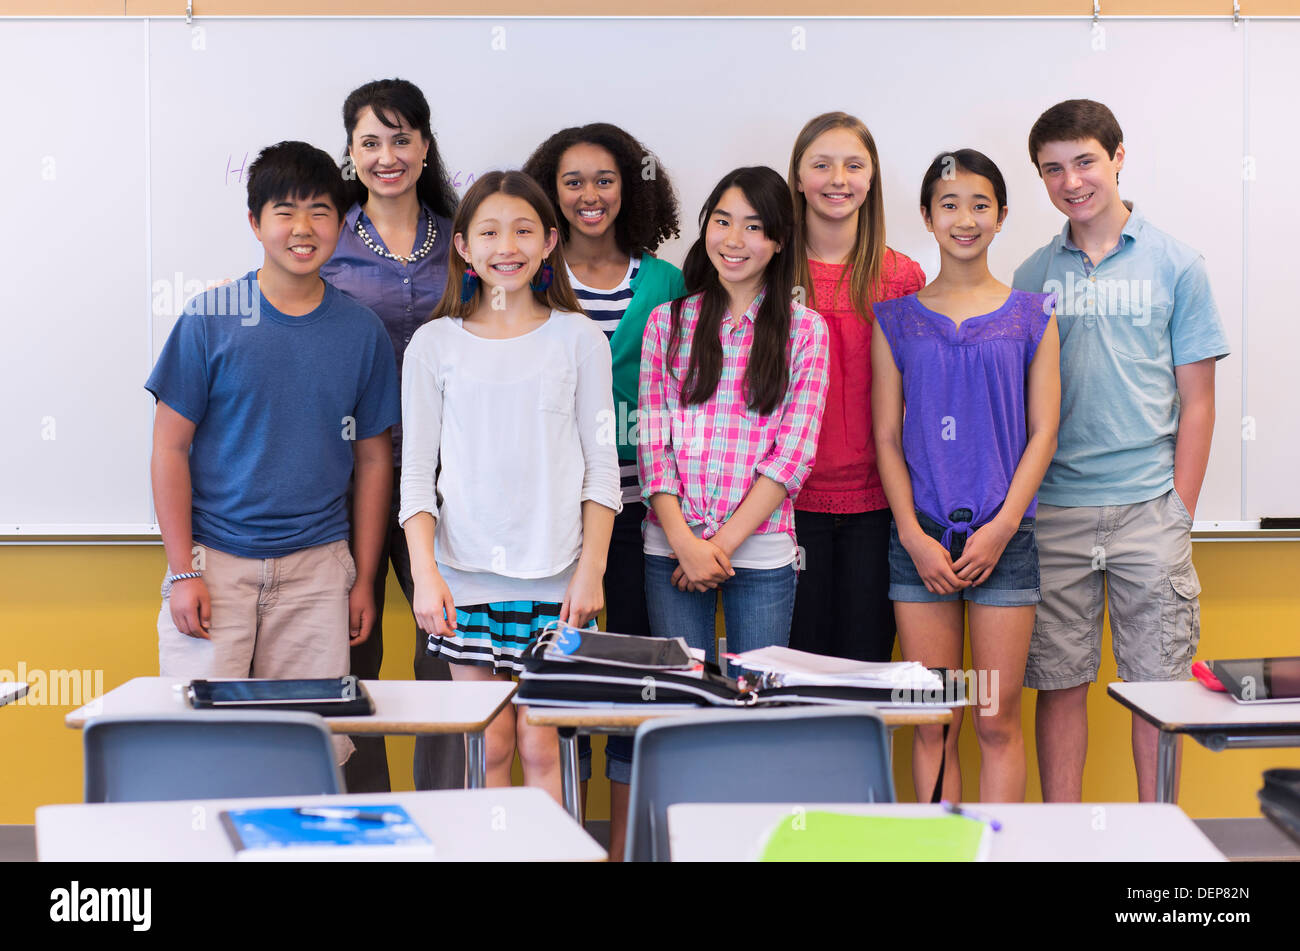 Teacher and students smiling in classroom Stock Photo